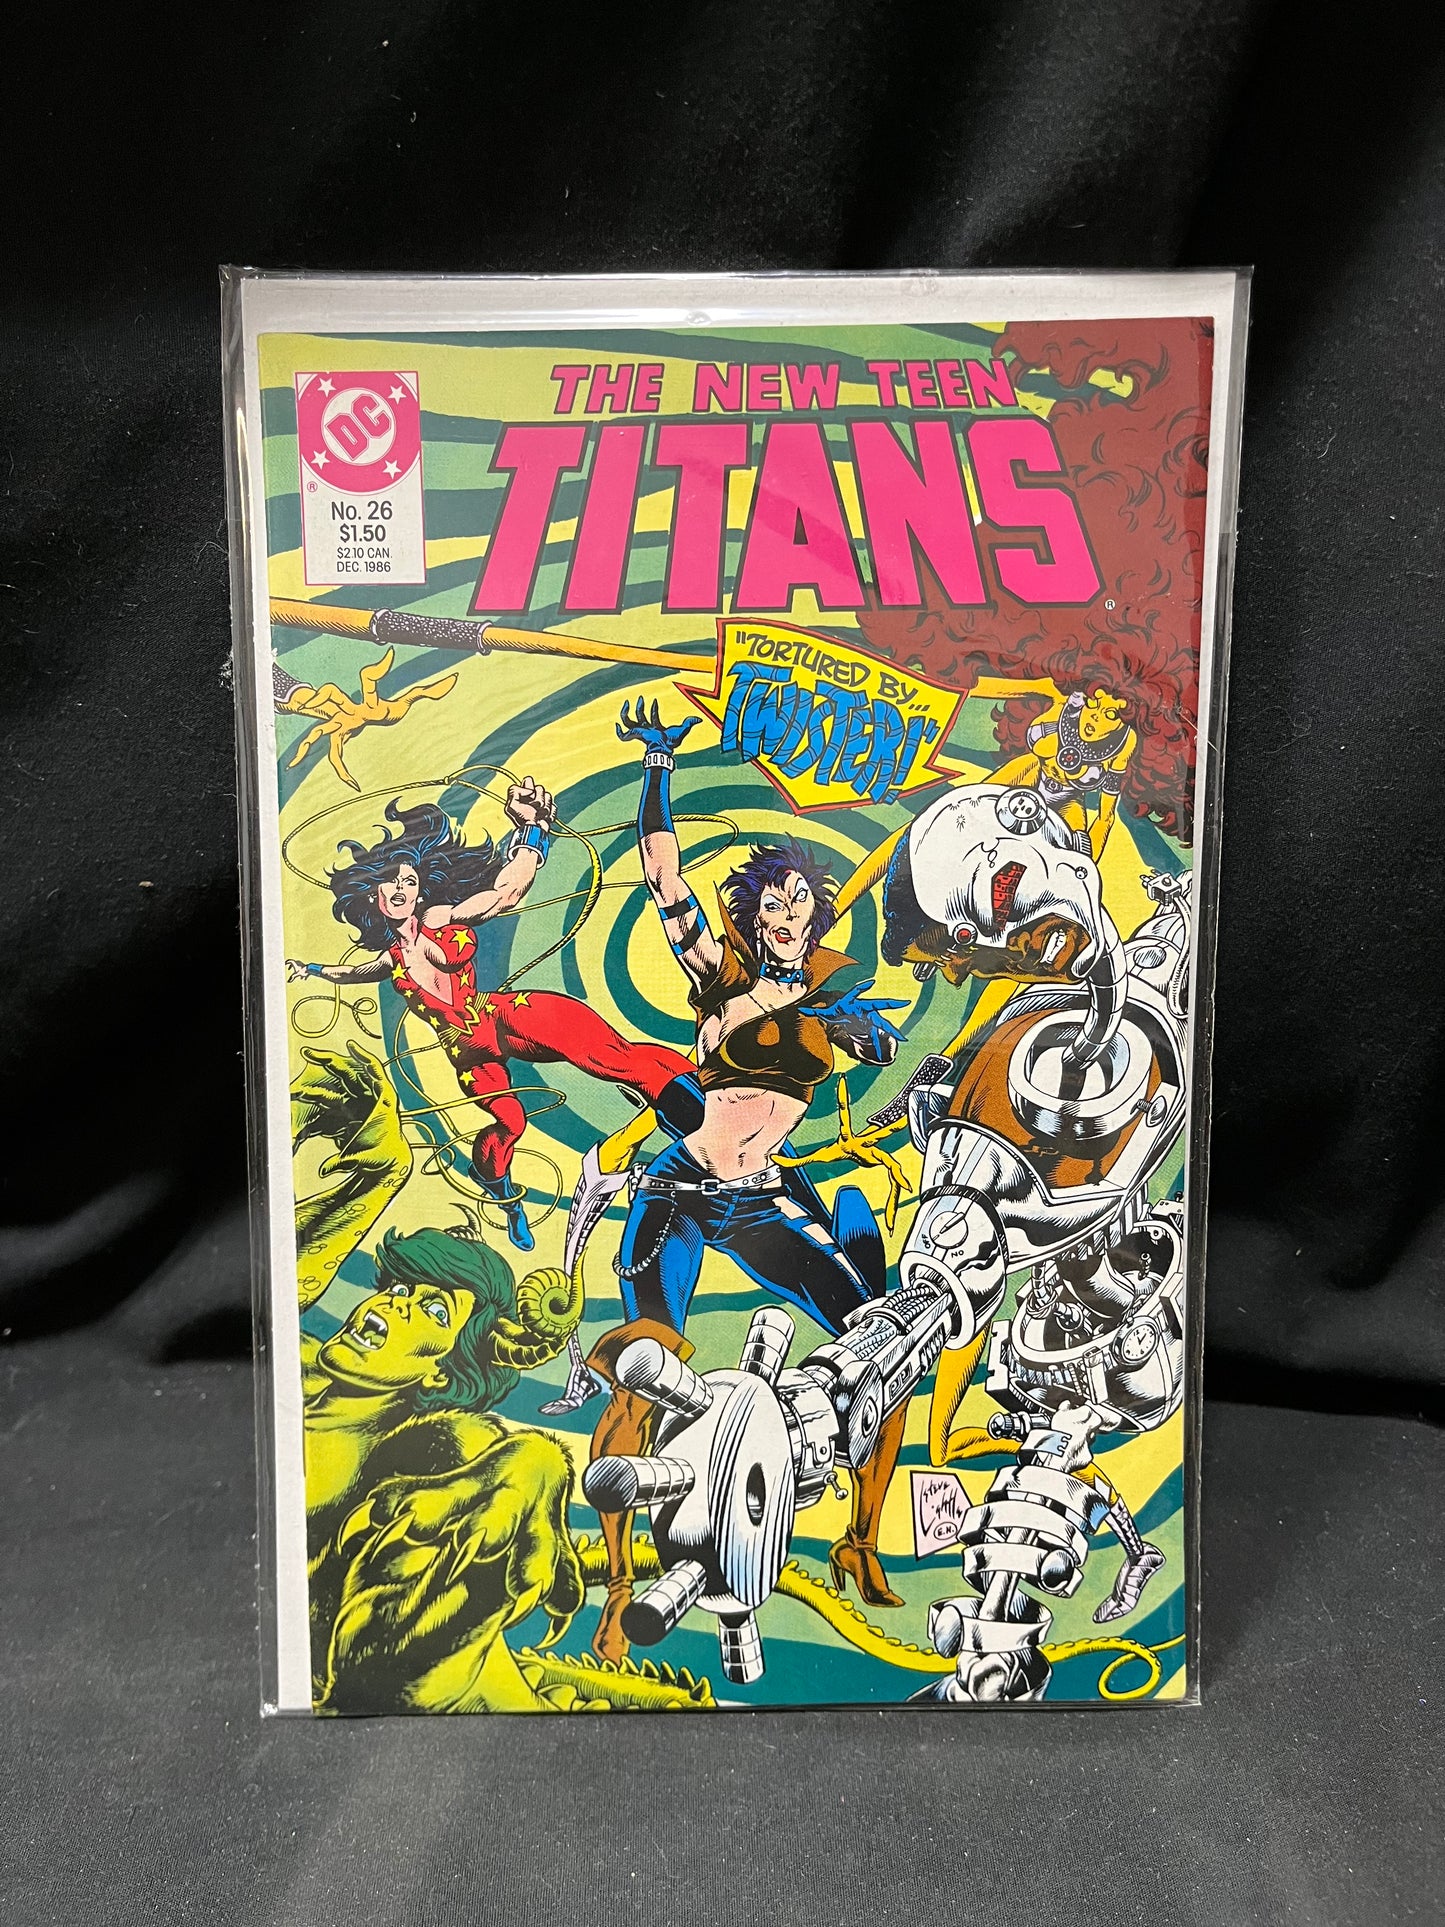 The New Teen Titans Comic Book No. 26 - Tortured By Twister!